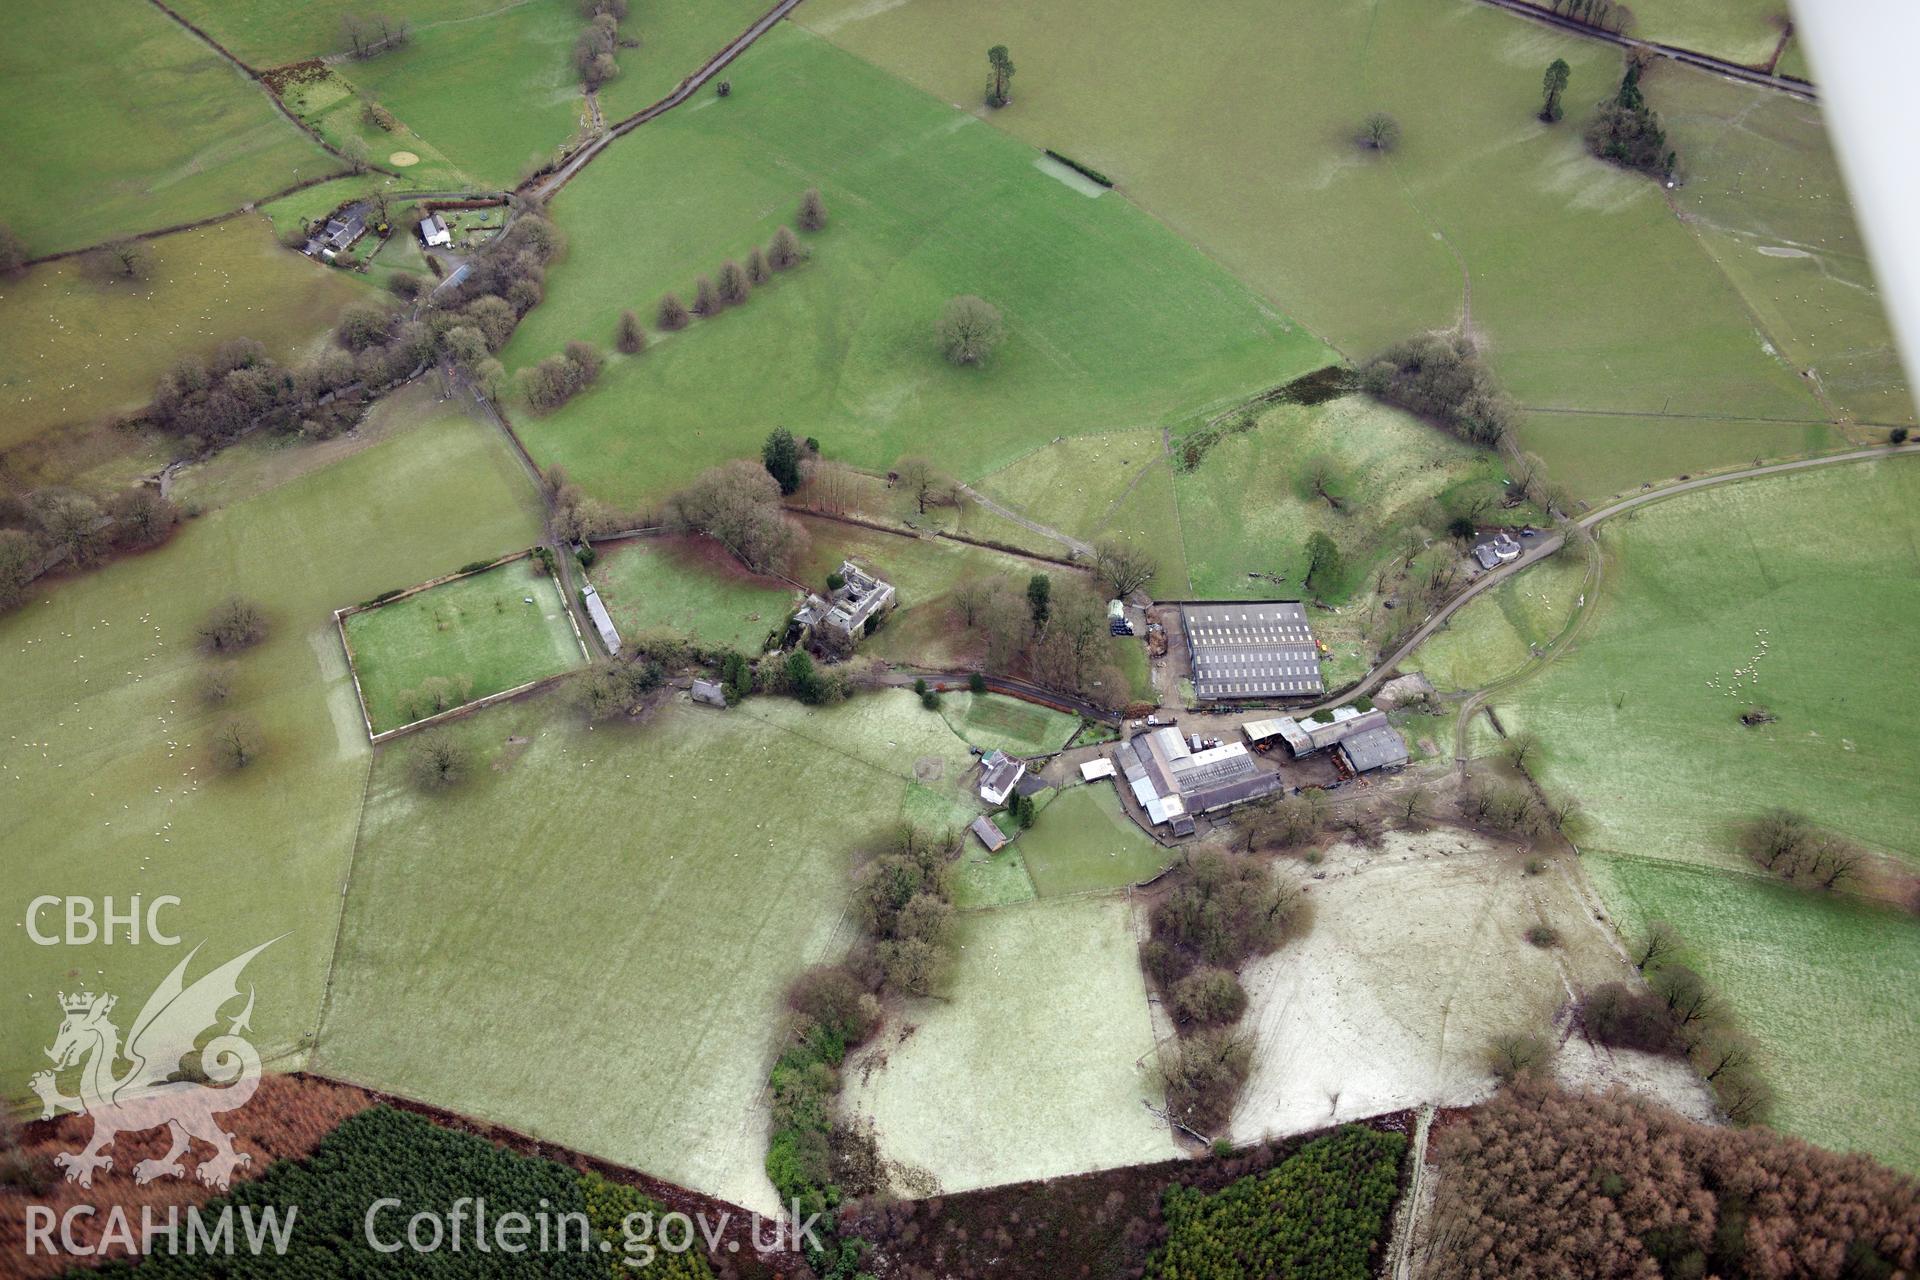 Neuadd Fawr and its associated garden, potting sheds, stables, and home farm, Cilycwm, south west of Llanwrtyd Wells. Oblique aerial photograph taken during Royal Commission?s programme of archaeological aerial reconnaissance by Toby Driver, 15 Jan 2013.